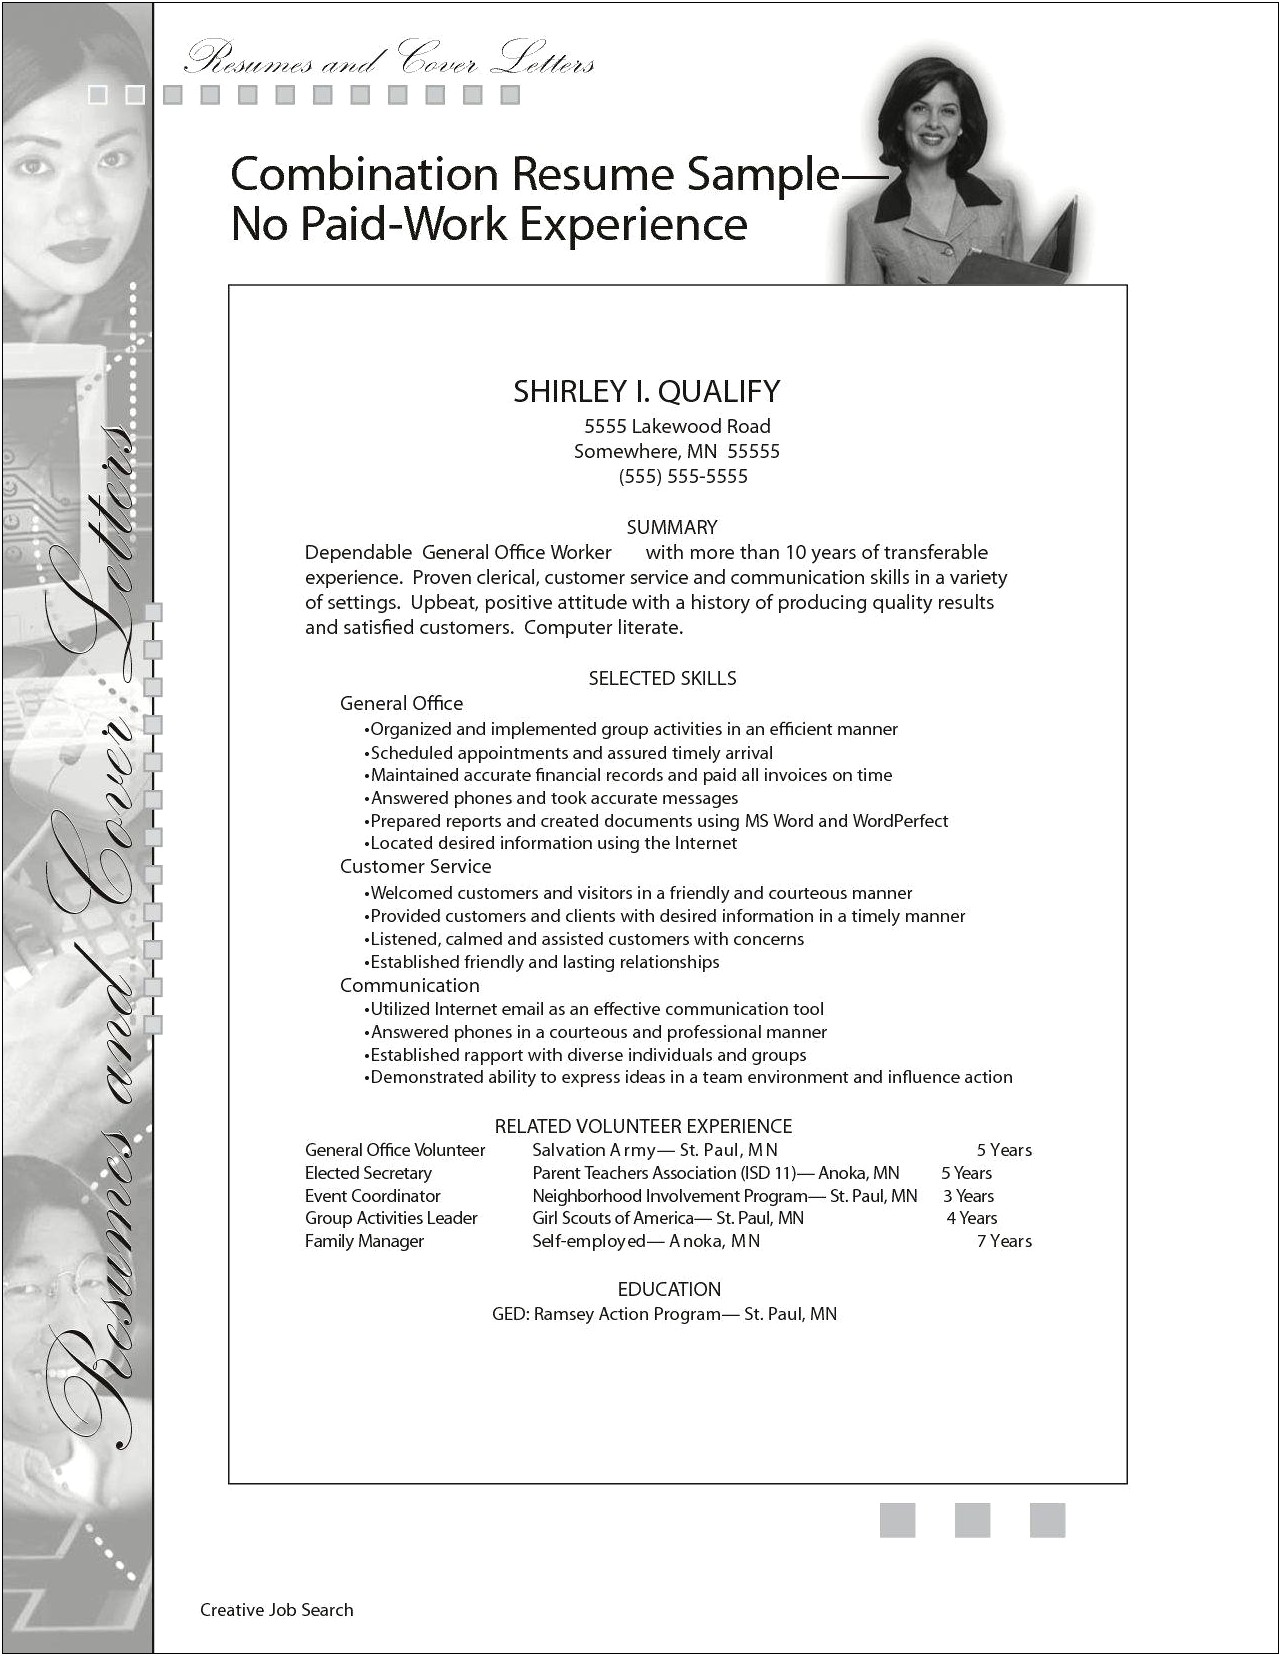 Resume Format Sample With No Work Experience